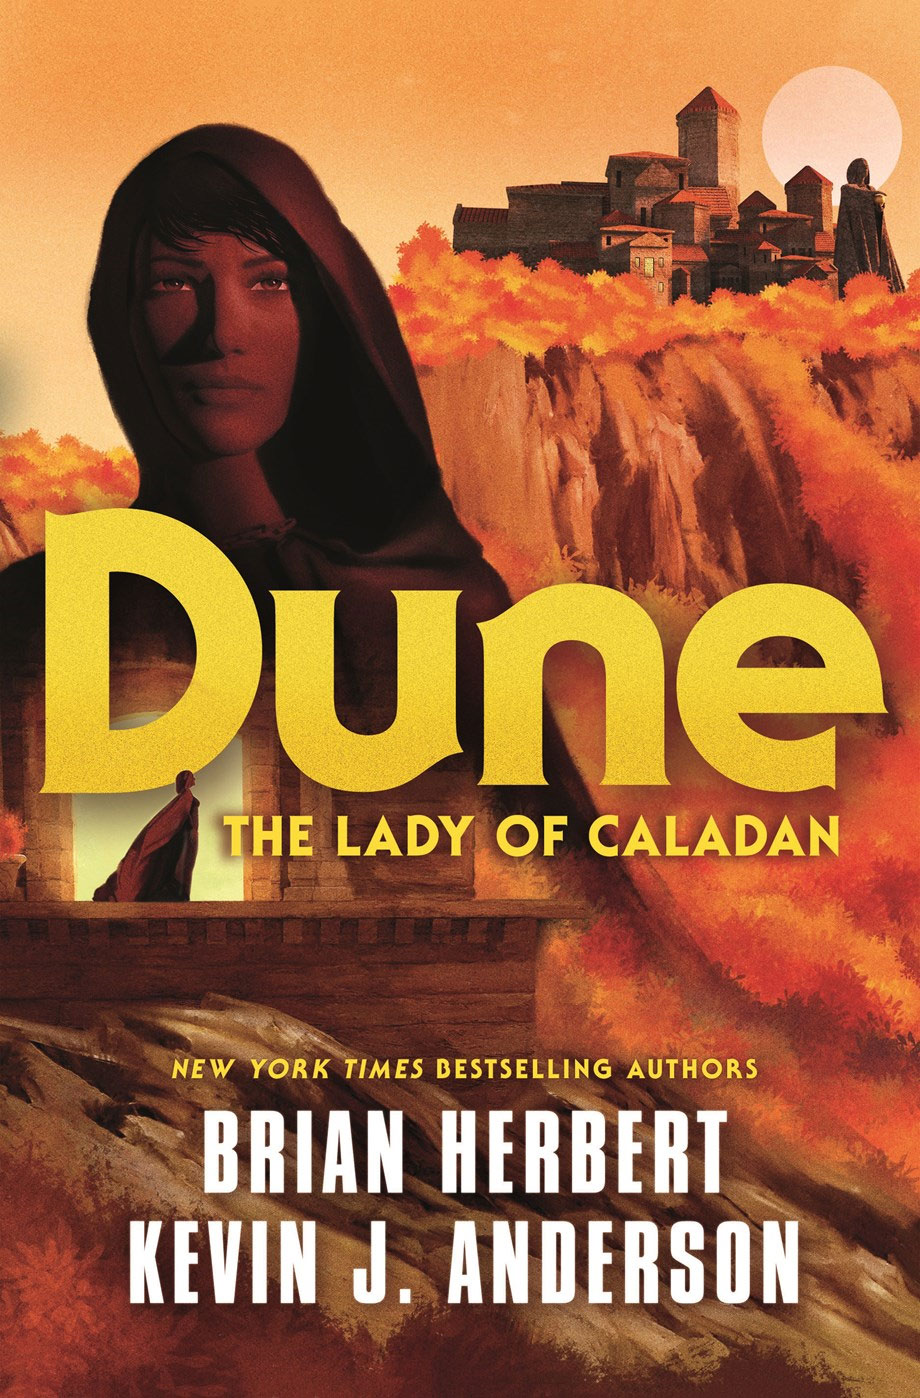 Final cover for the 'Dune: The Lady of Caladan' book, featuring Matt Griffin's illustration of Lady Jessica.